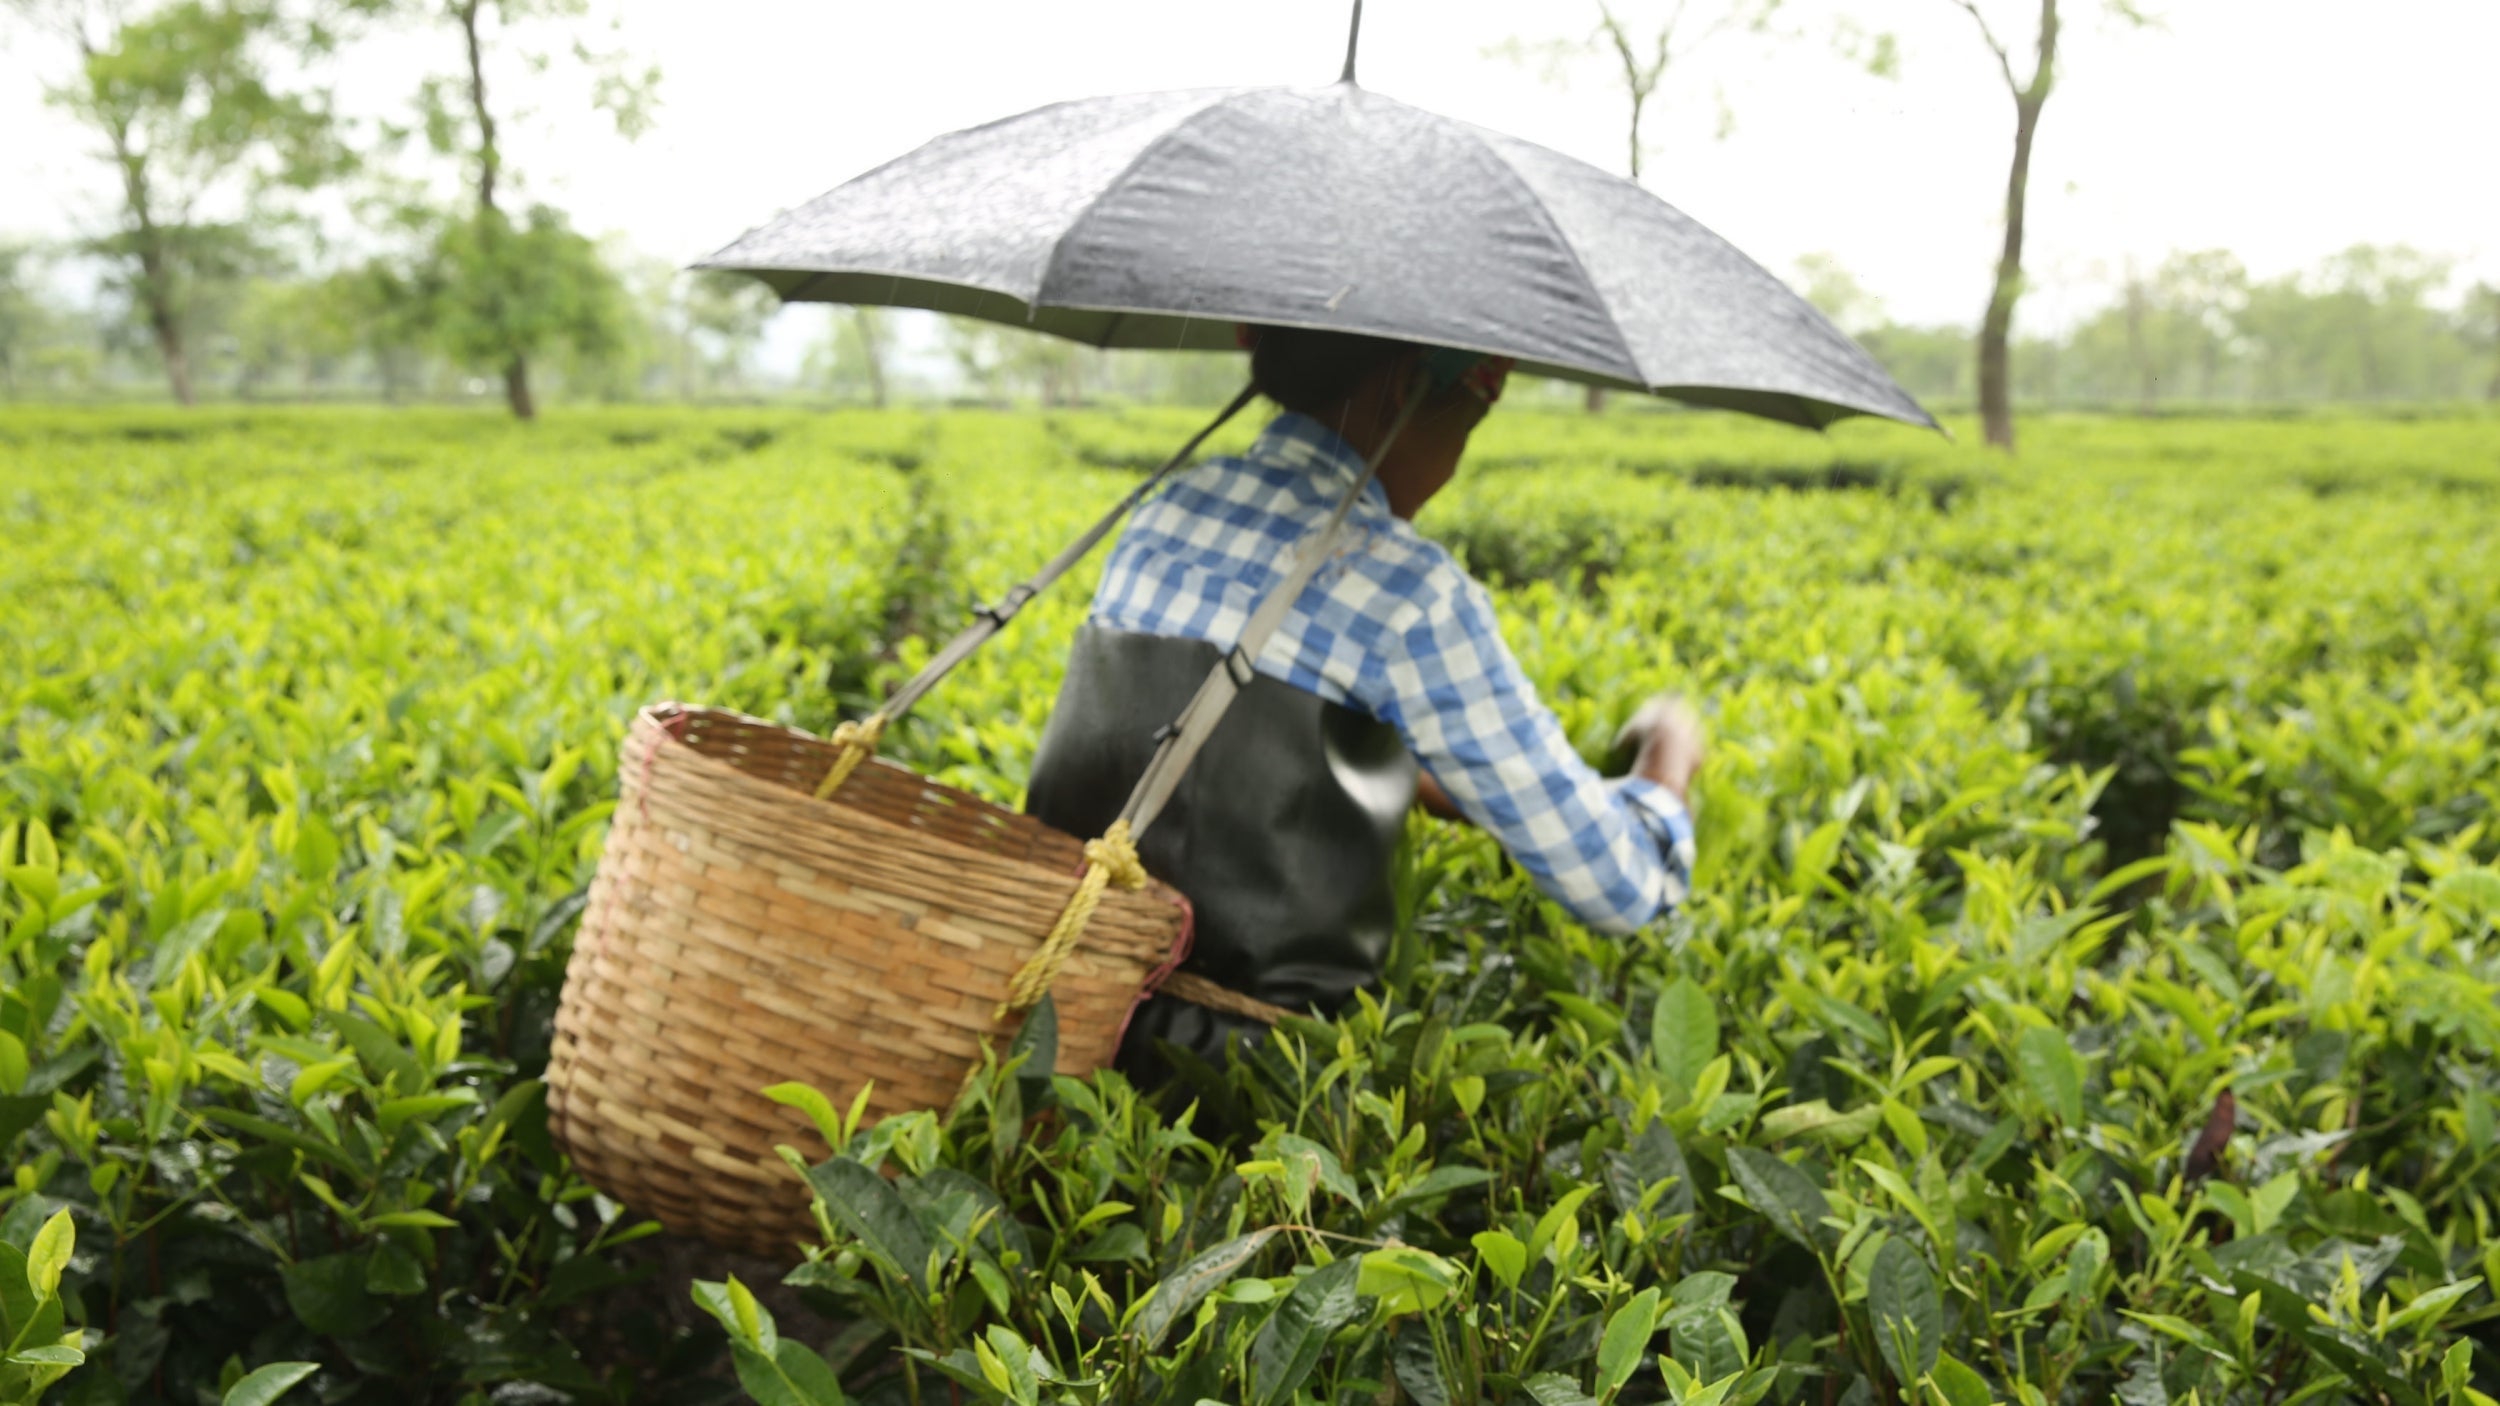 Tea Garden Assam Sex Porn - Poverty and disease rife on farms supplying big supermarkets, Oxfam says |  The Independent | The Independent